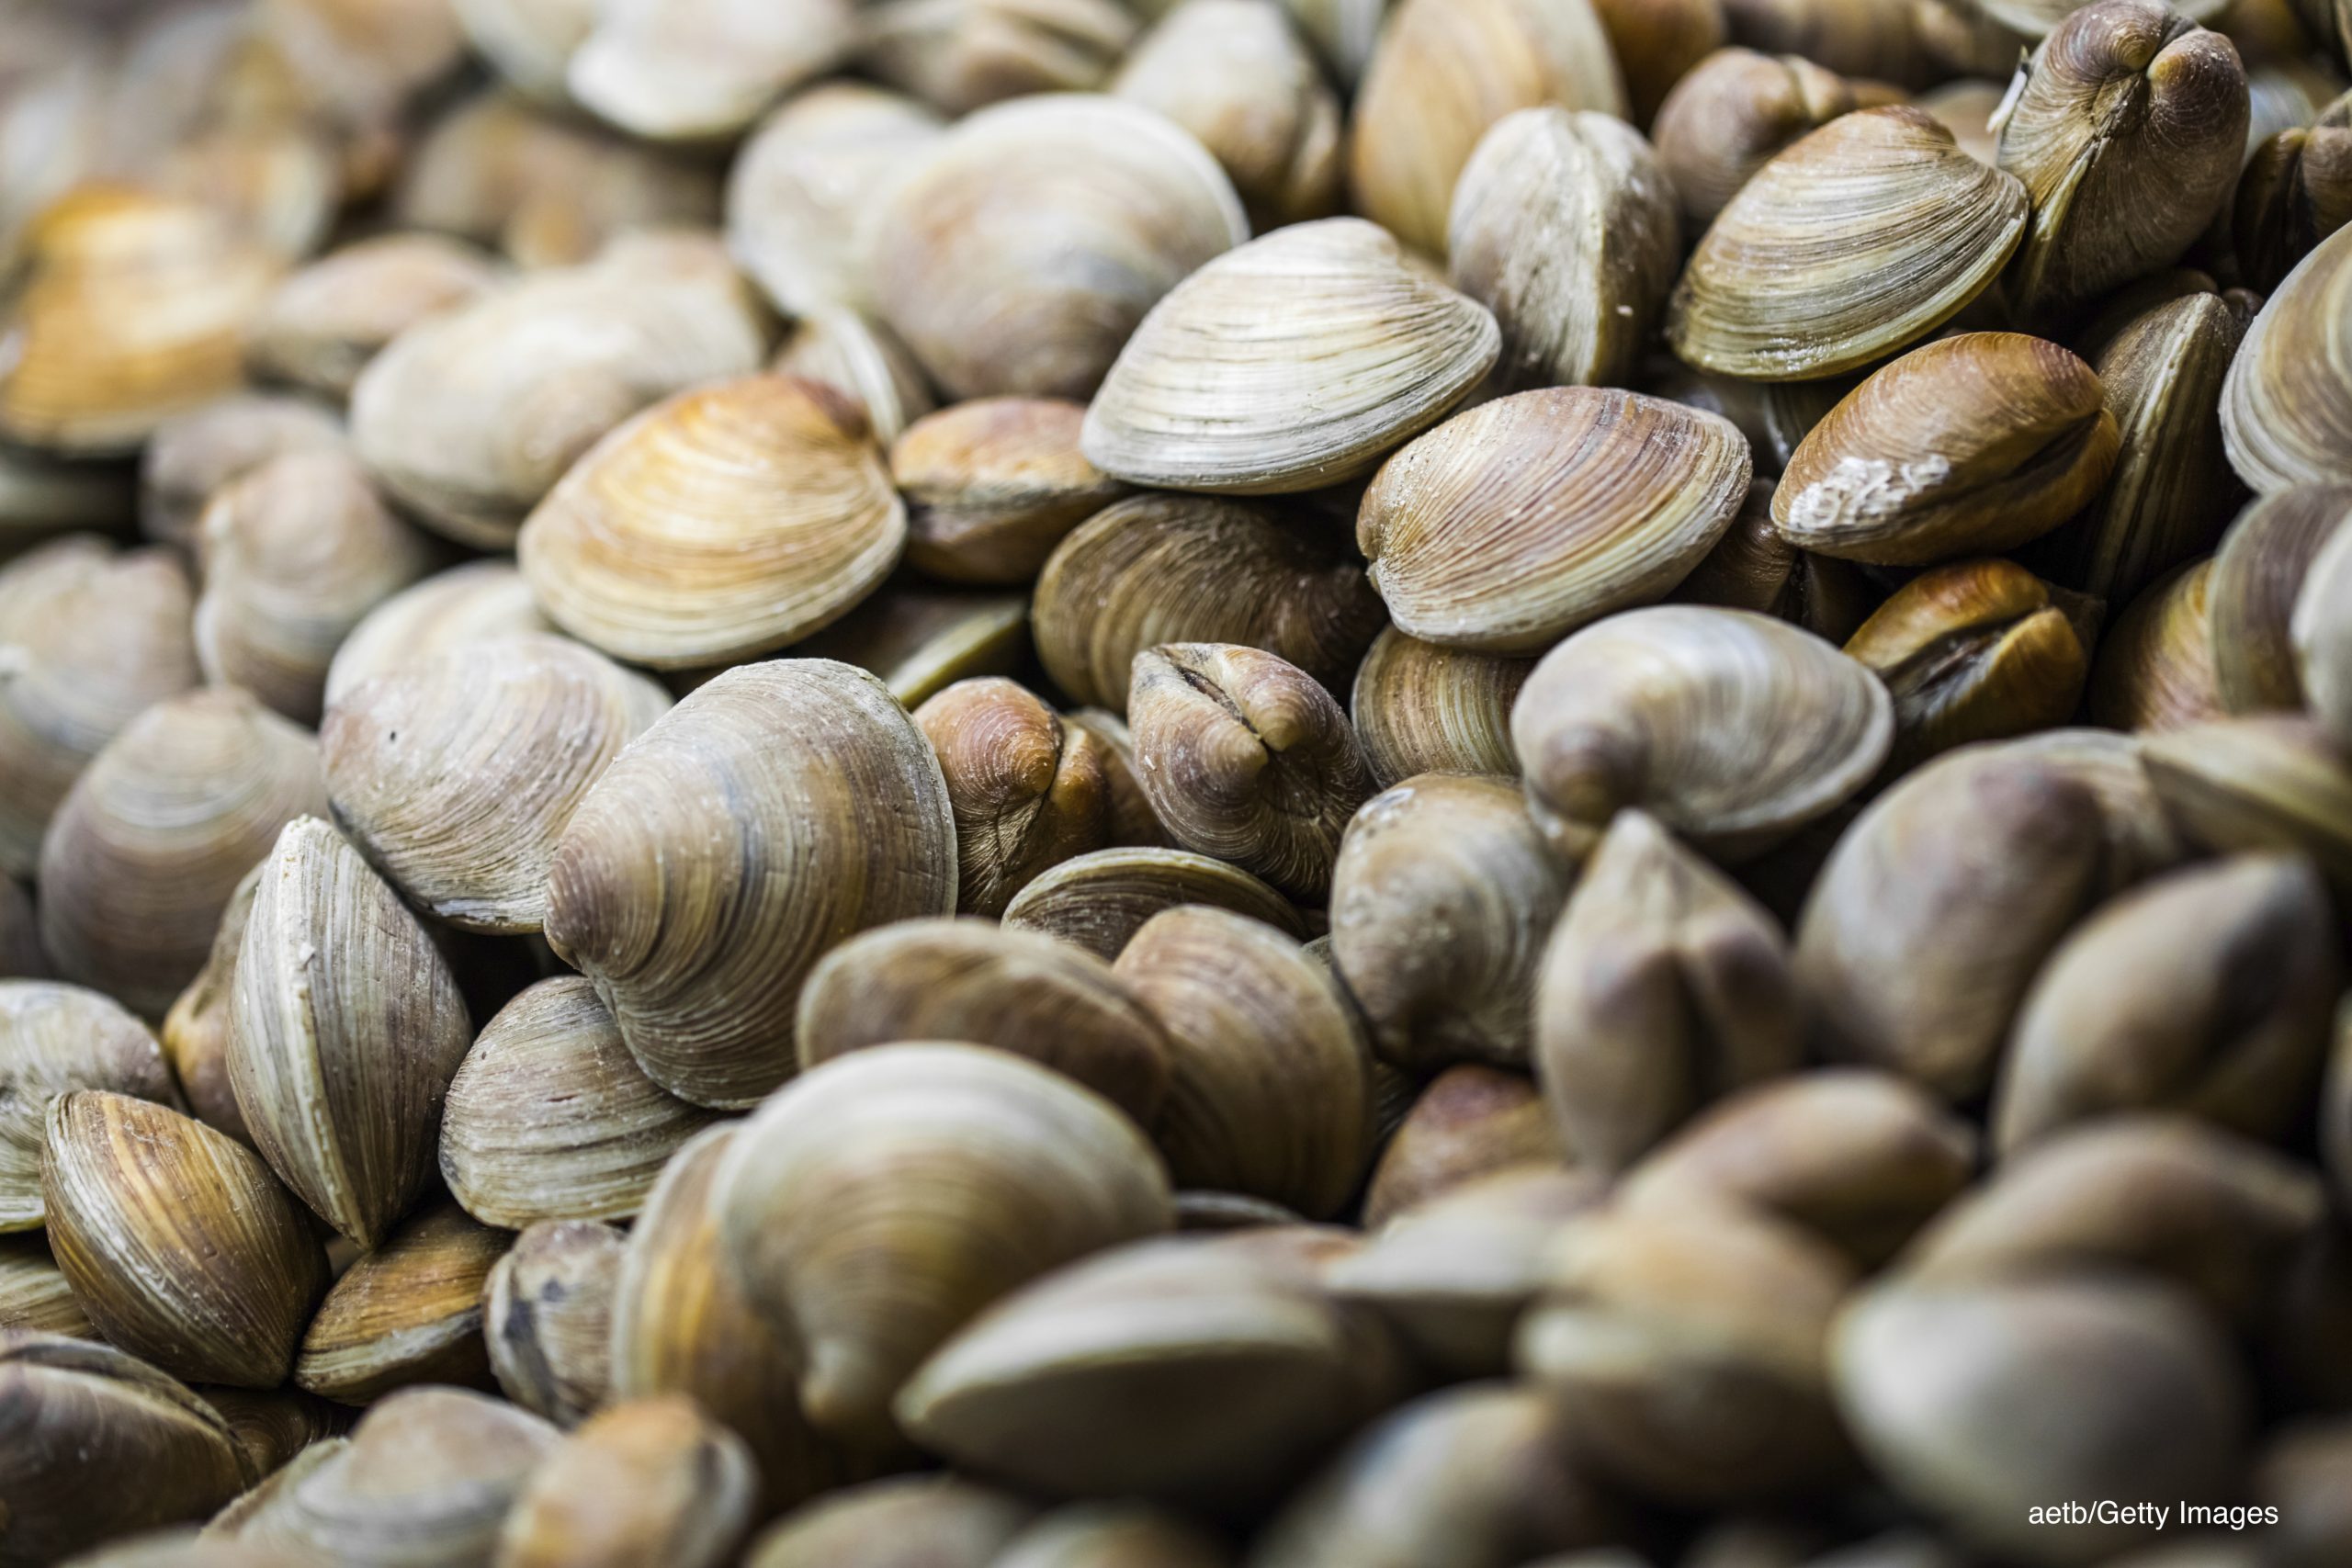 Shellfish Trade Resumes Between U.S. and Europe - Food Quality & Safety